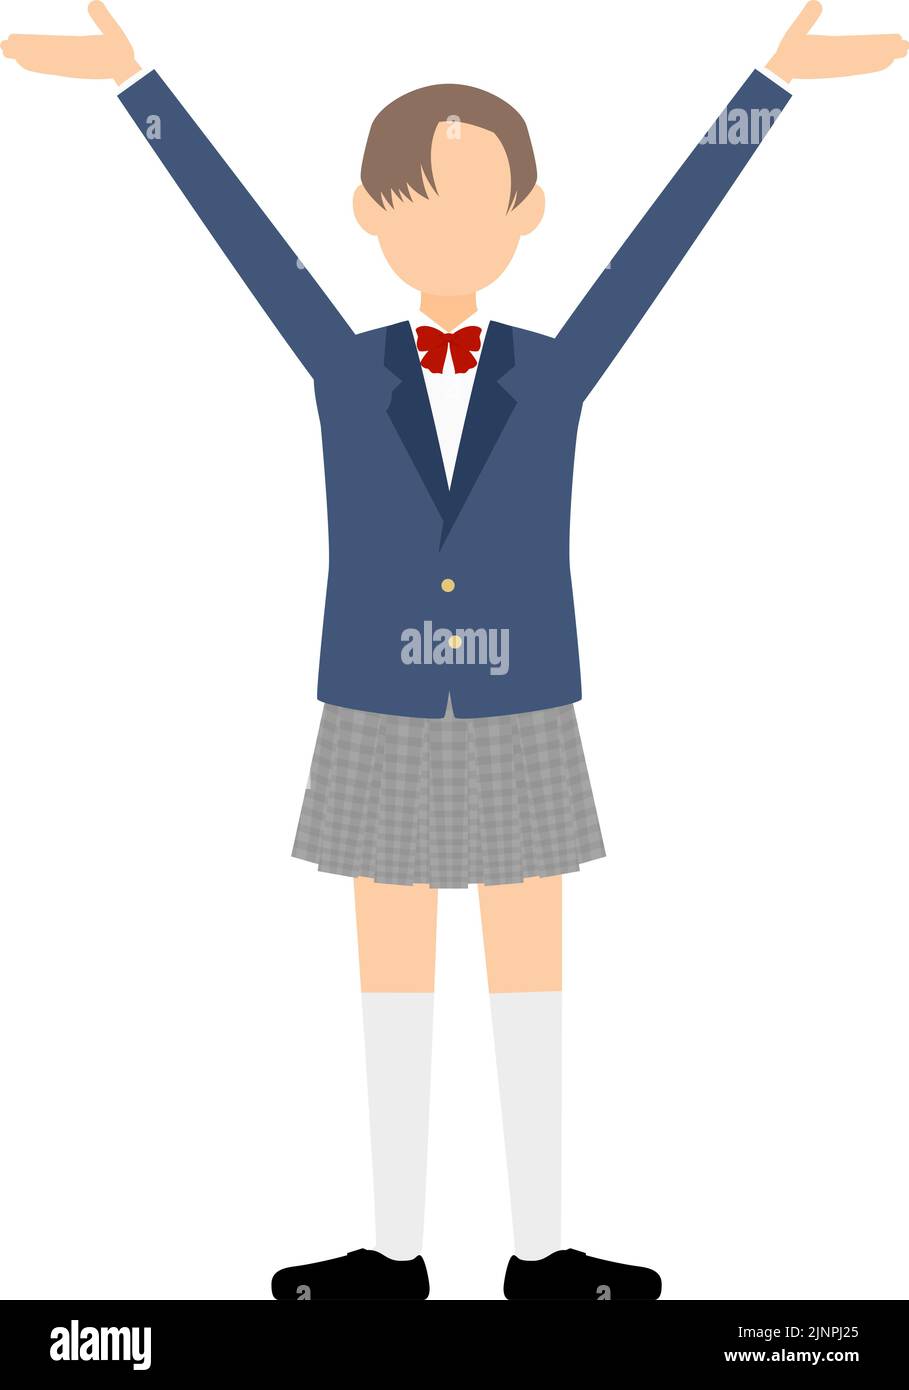 Genderless, blazer uniform, Hailing gesture with outstretched arms Stock Vector